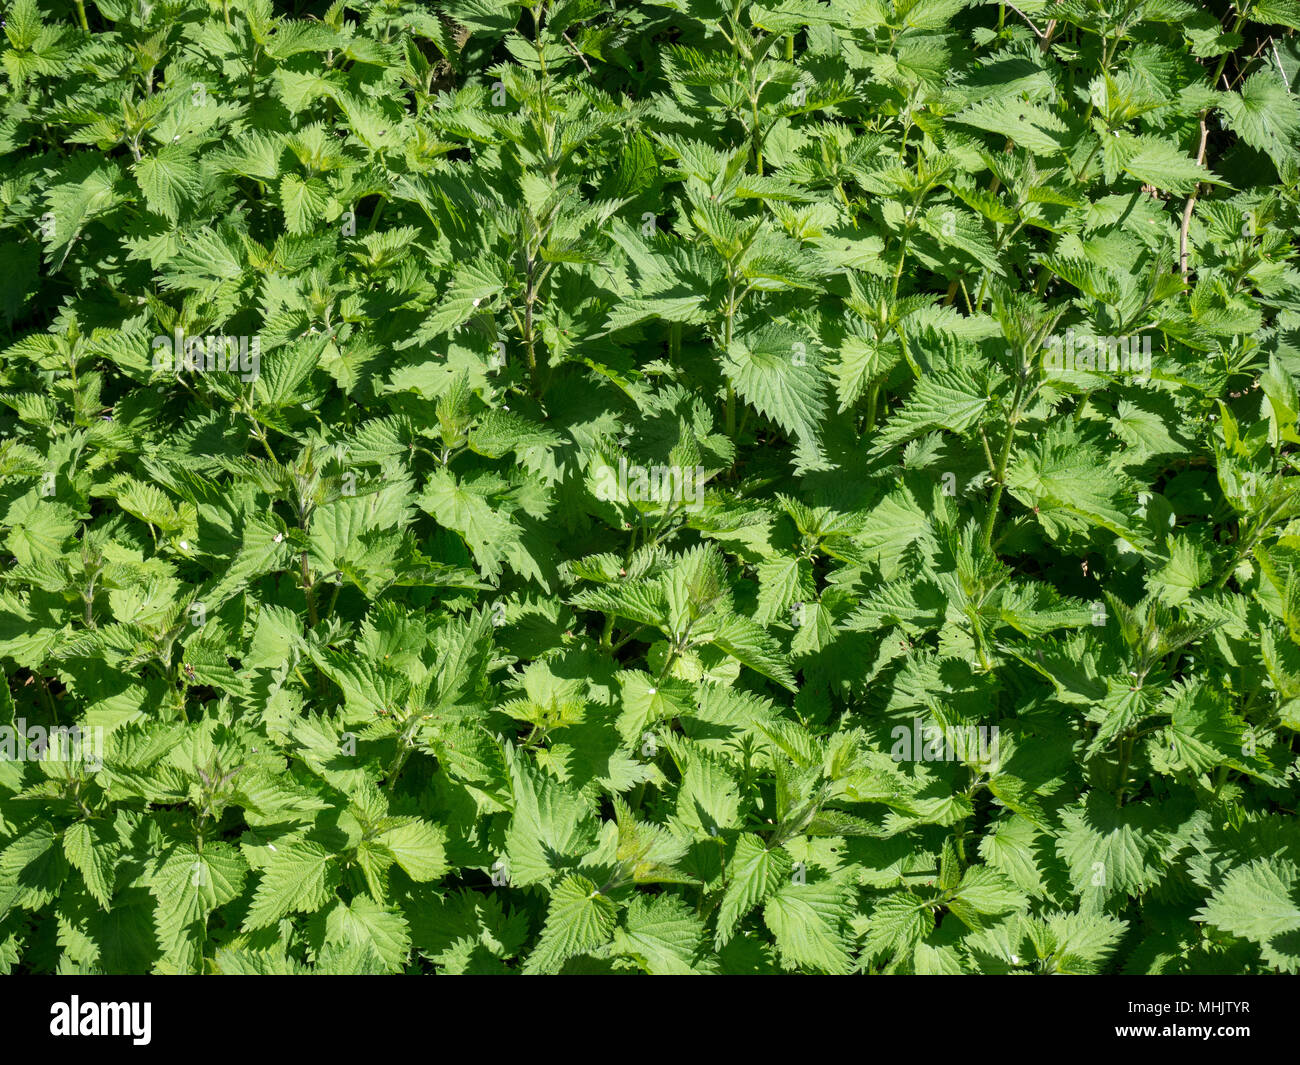 Frame filling image of the fresh green foliage of a patch of stinging nettles Urtica dioica Stock Photo